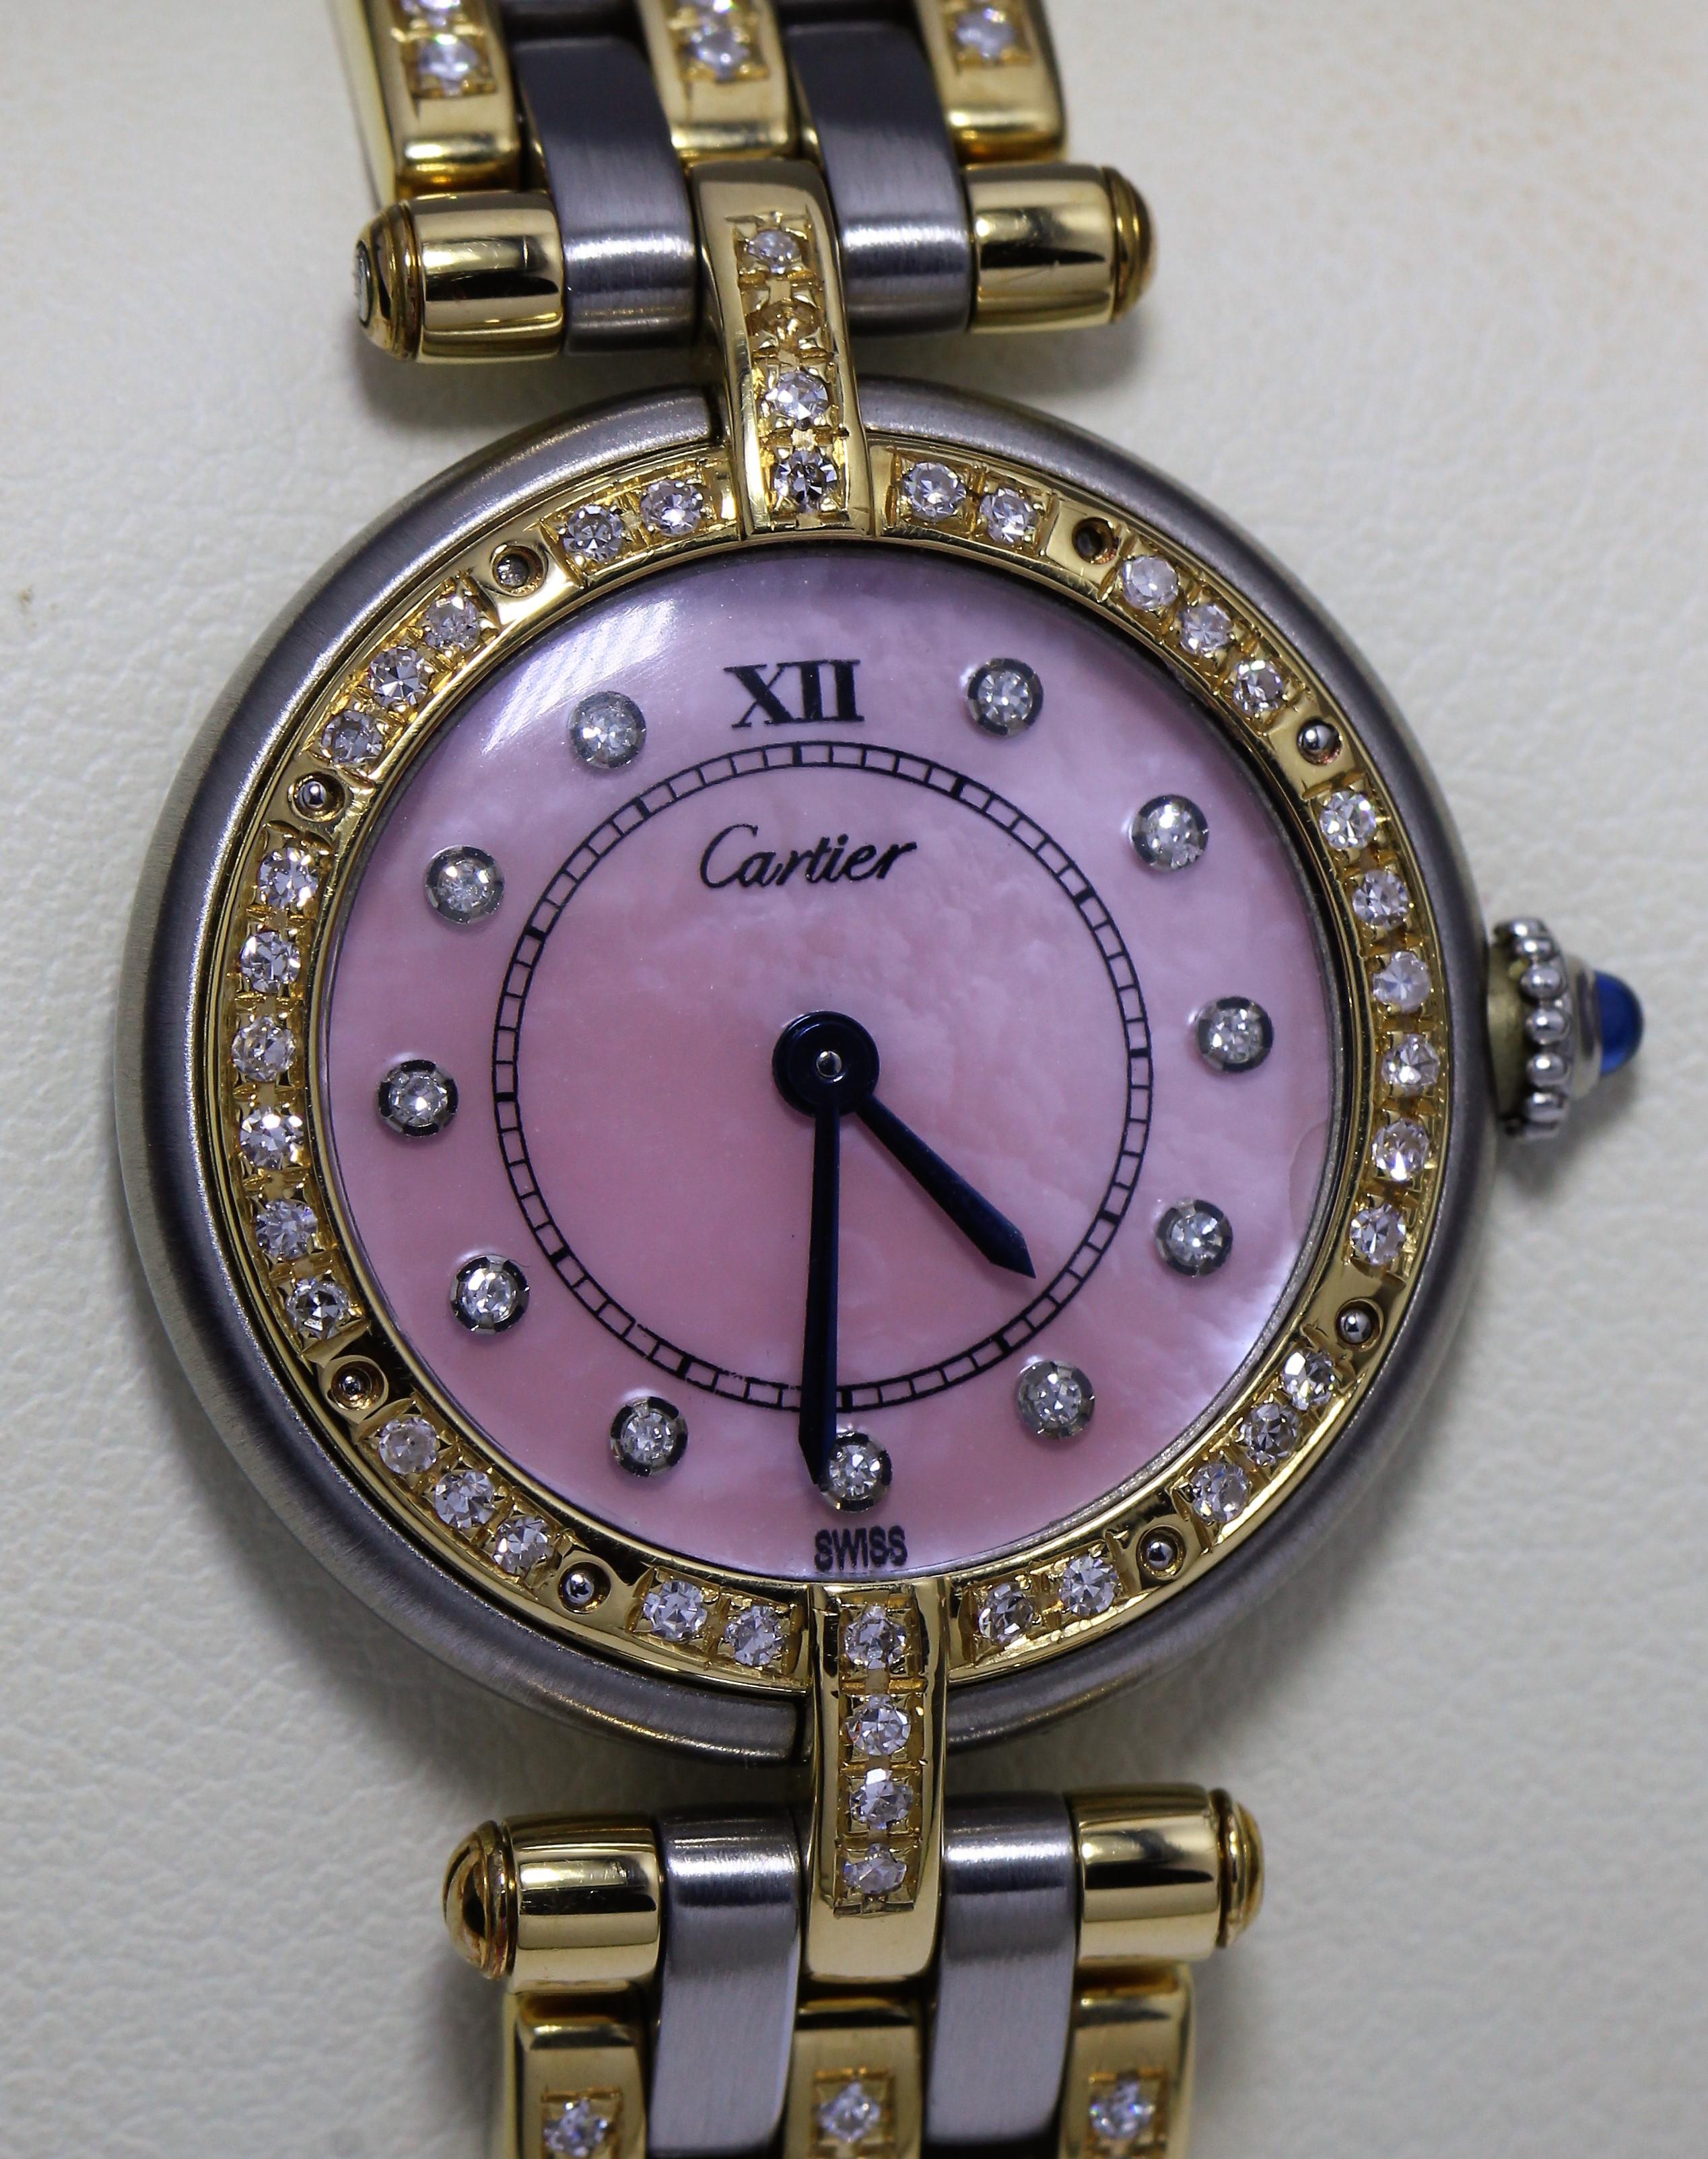 Cartier Ladies Watch with Pink Oyster Face and Diamond Studded Bezel

Diamond Studded Bezel, Band, and Hour Markers